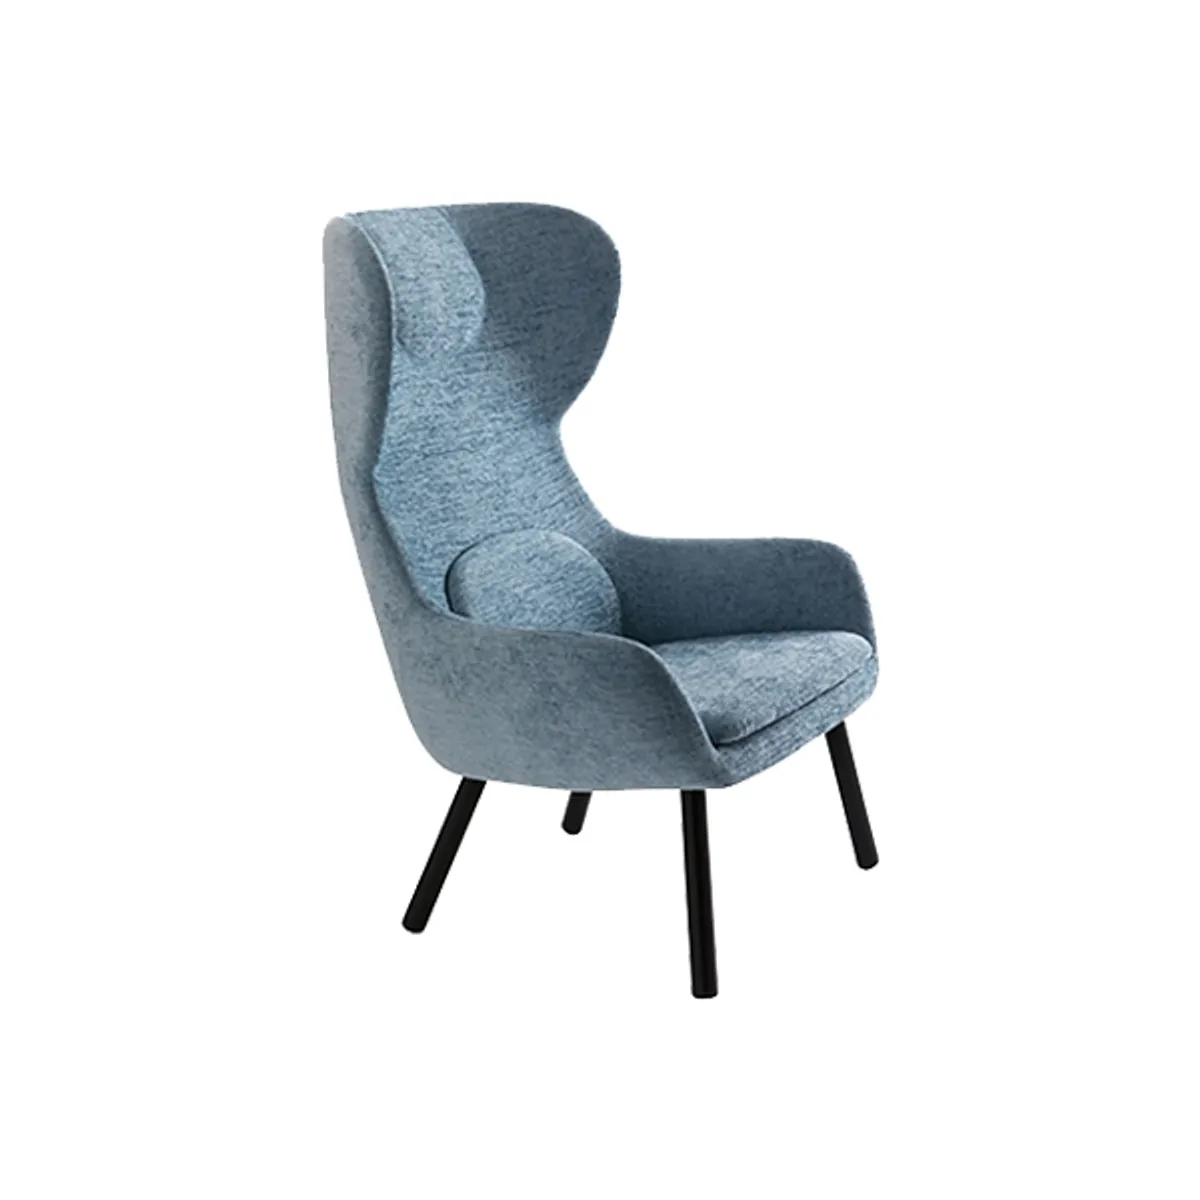 Myrawoodwingbackchair Inside Out Contracts